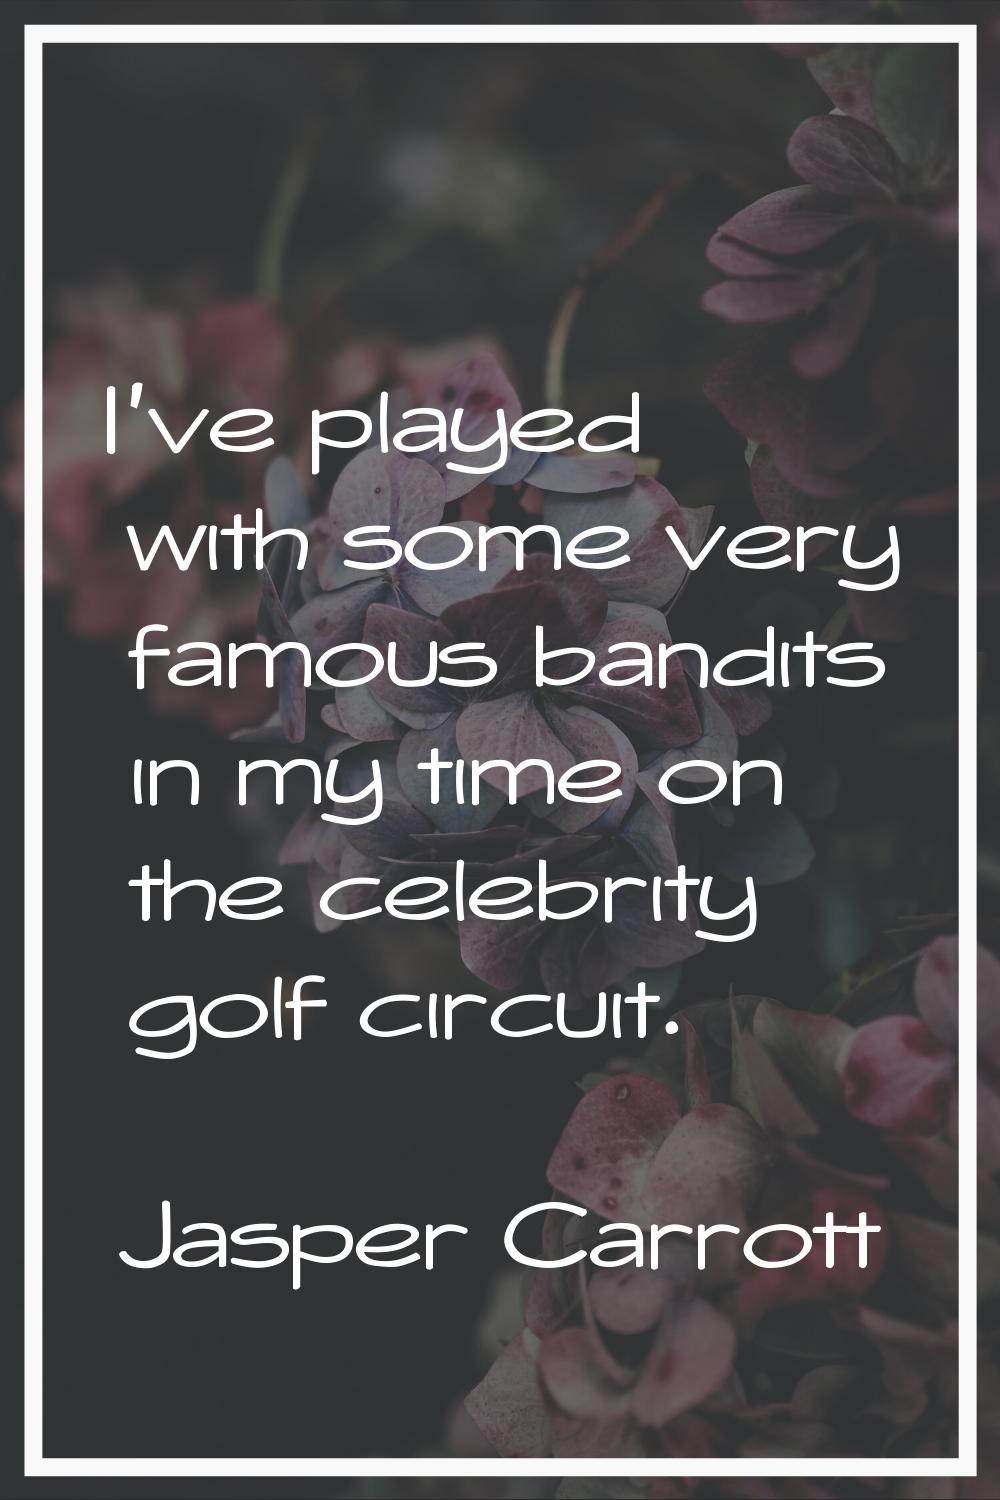 I've played with some very famous bandits in my time on the celebrity golf circuit.